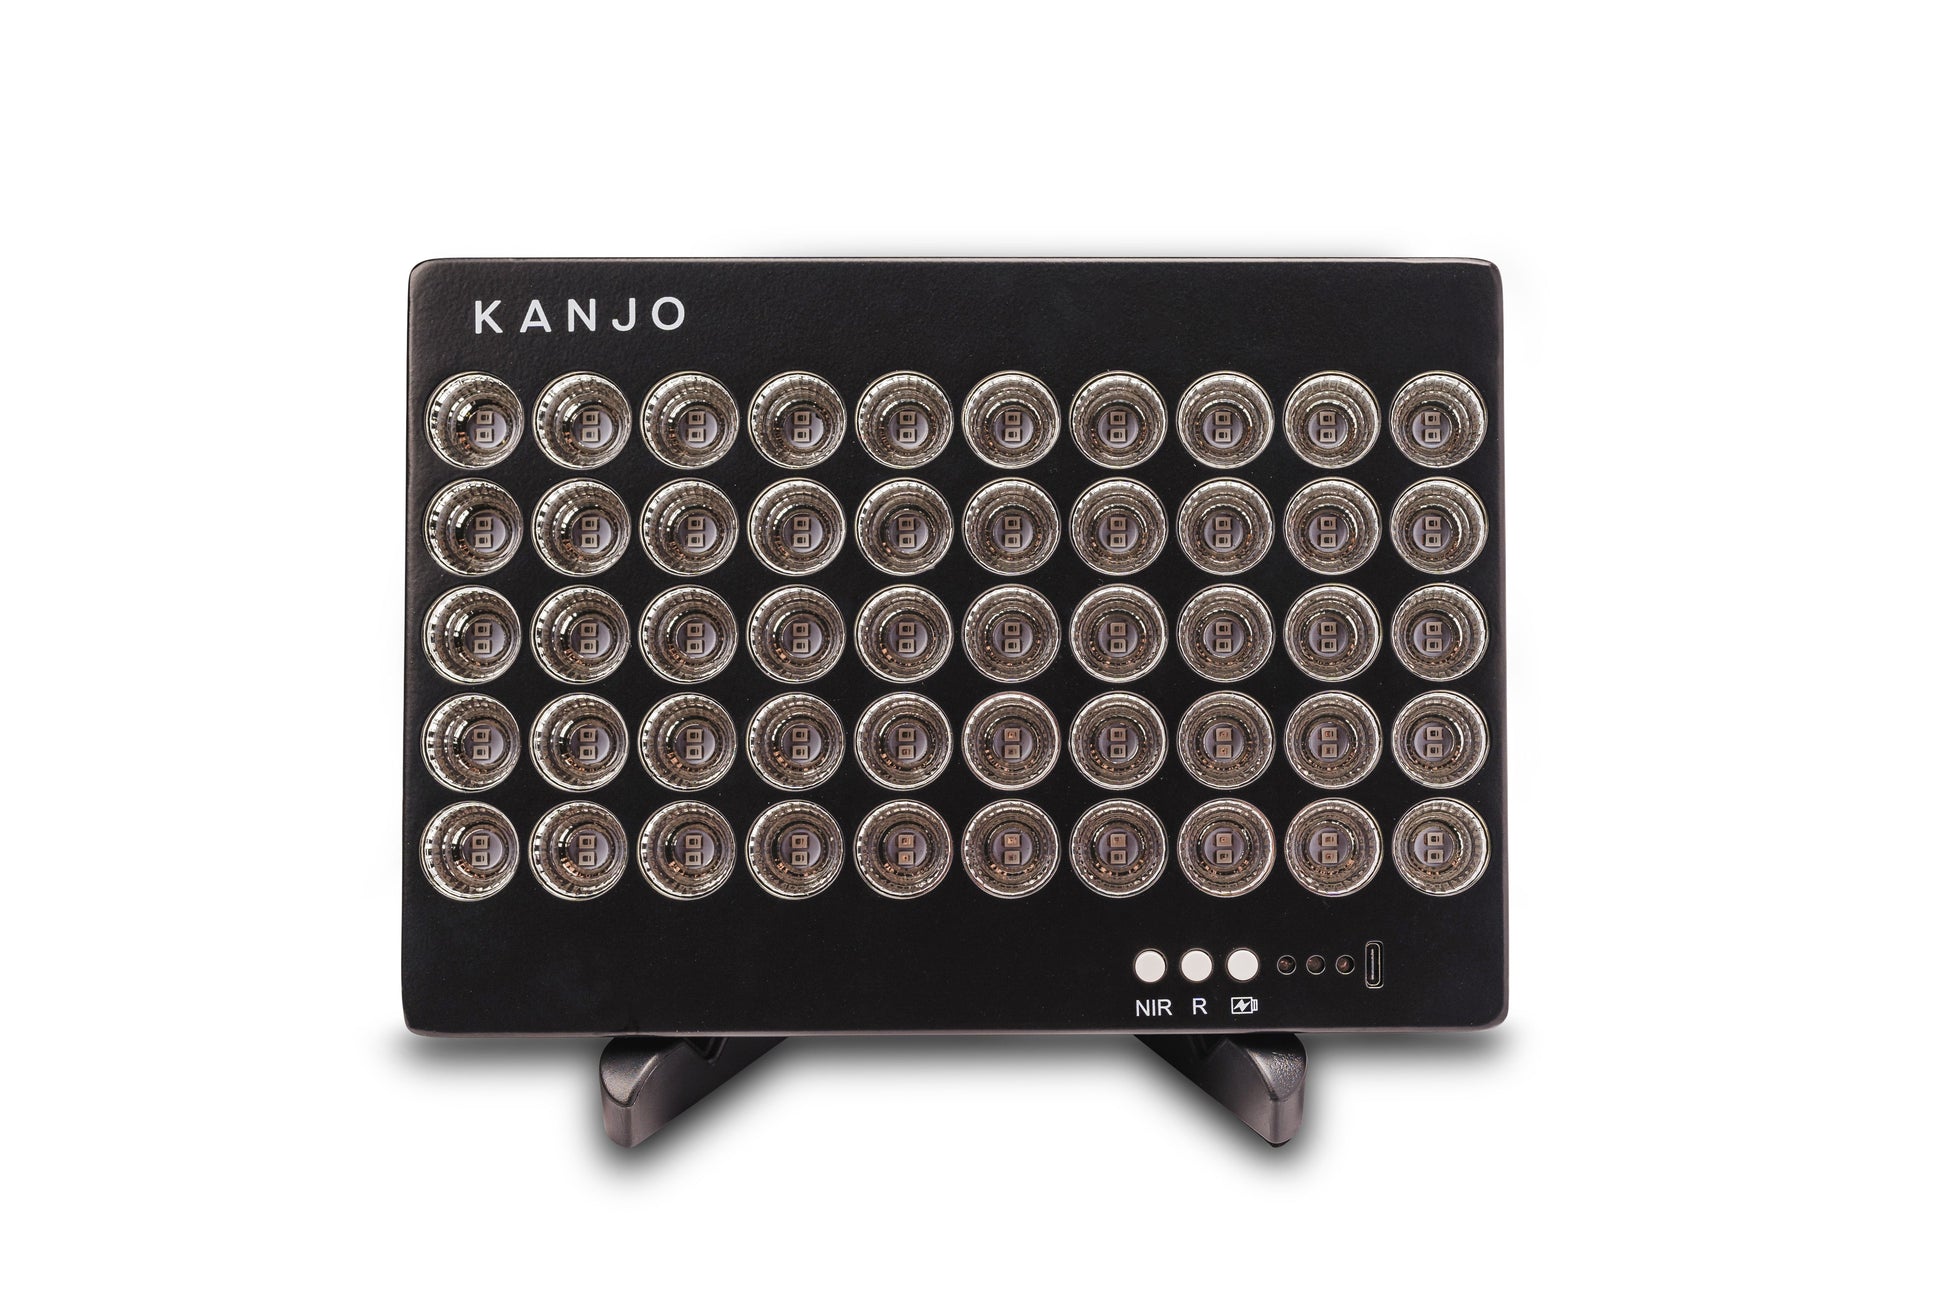 Kanjo Handheld Red Light Therapy Device